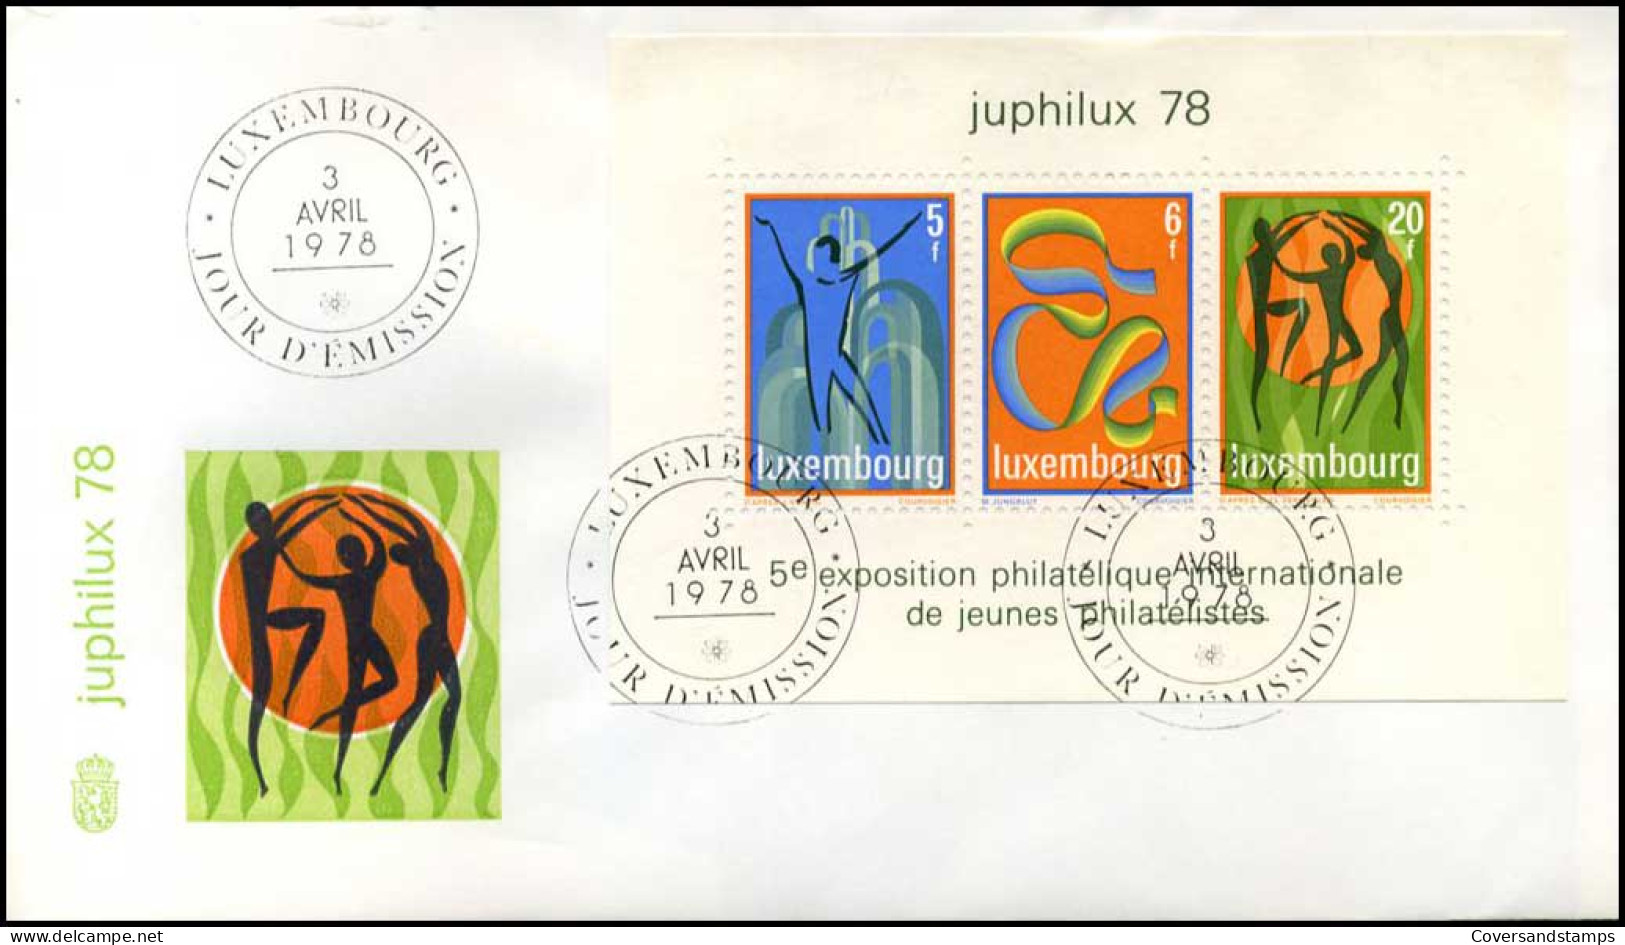 Luxembourg - FDC - Juphilux 78 - FDC